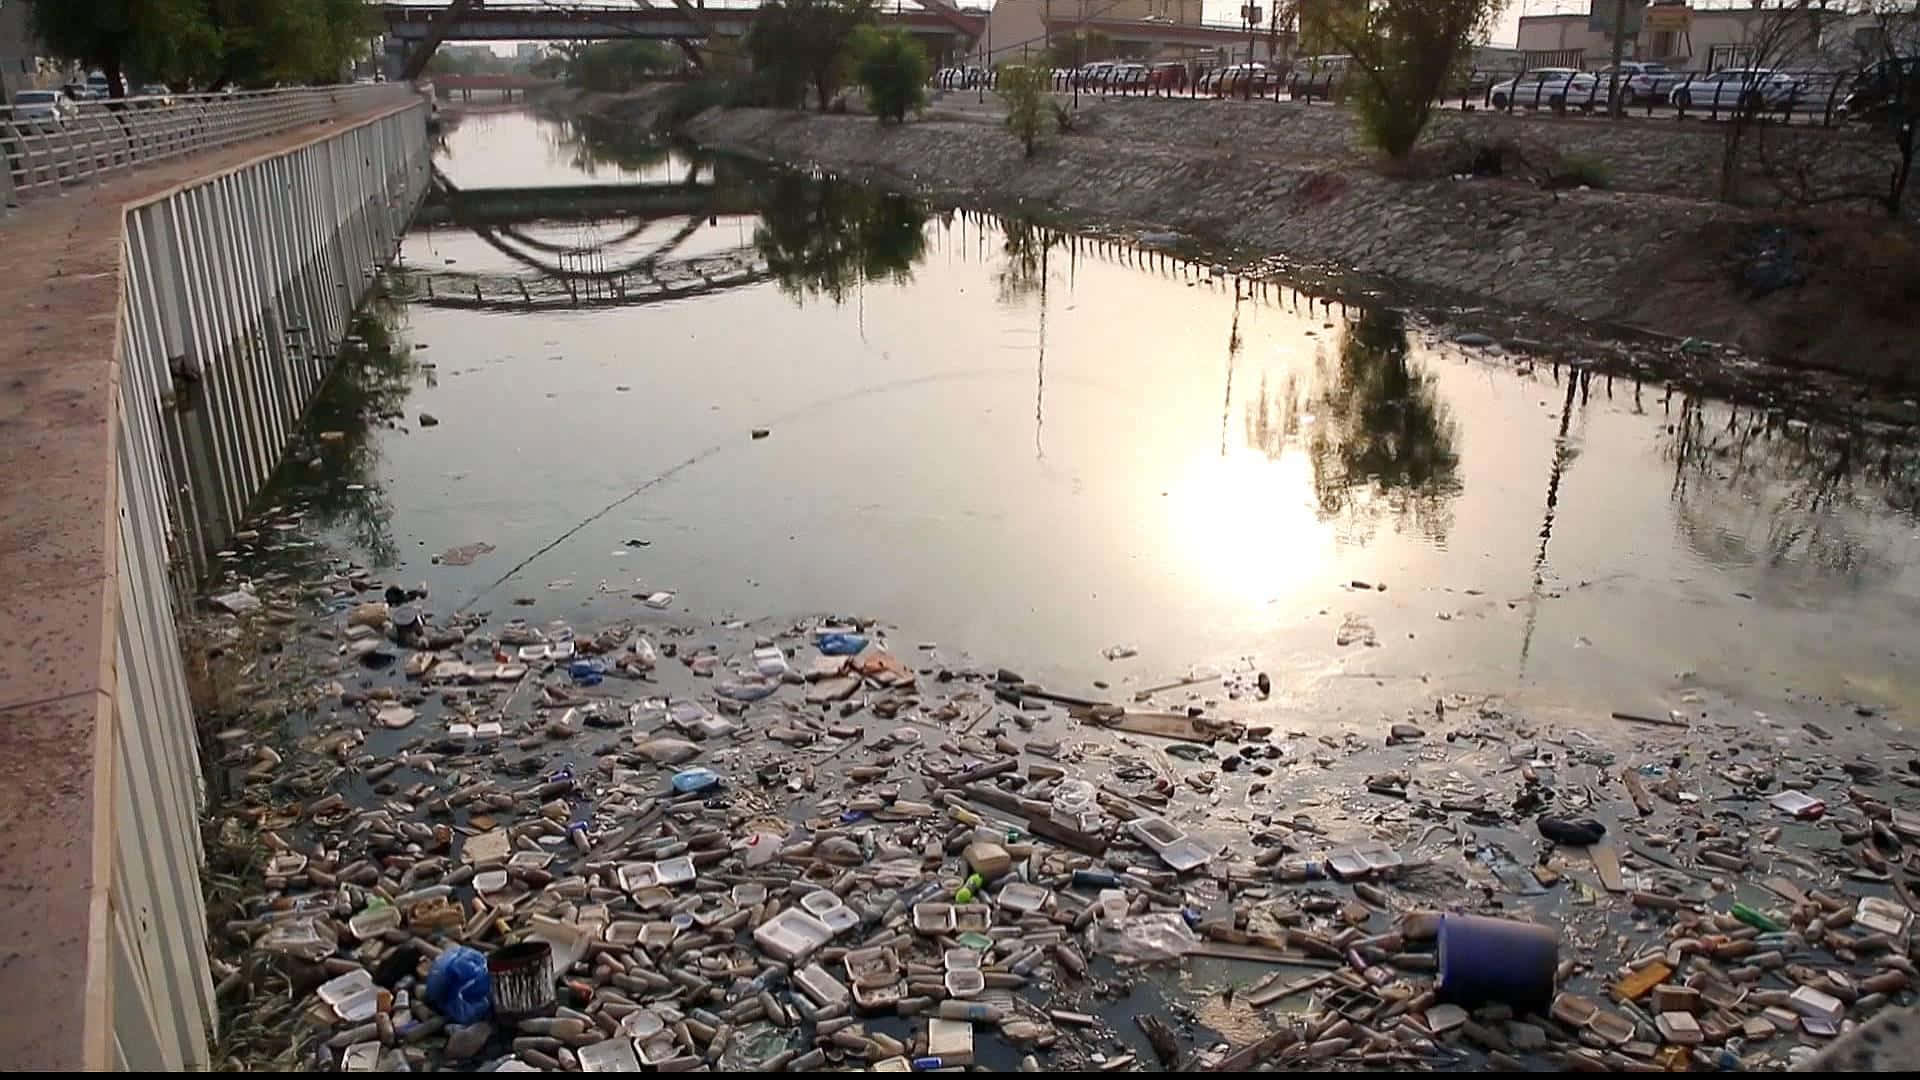 A River With Trash And Garbage In It